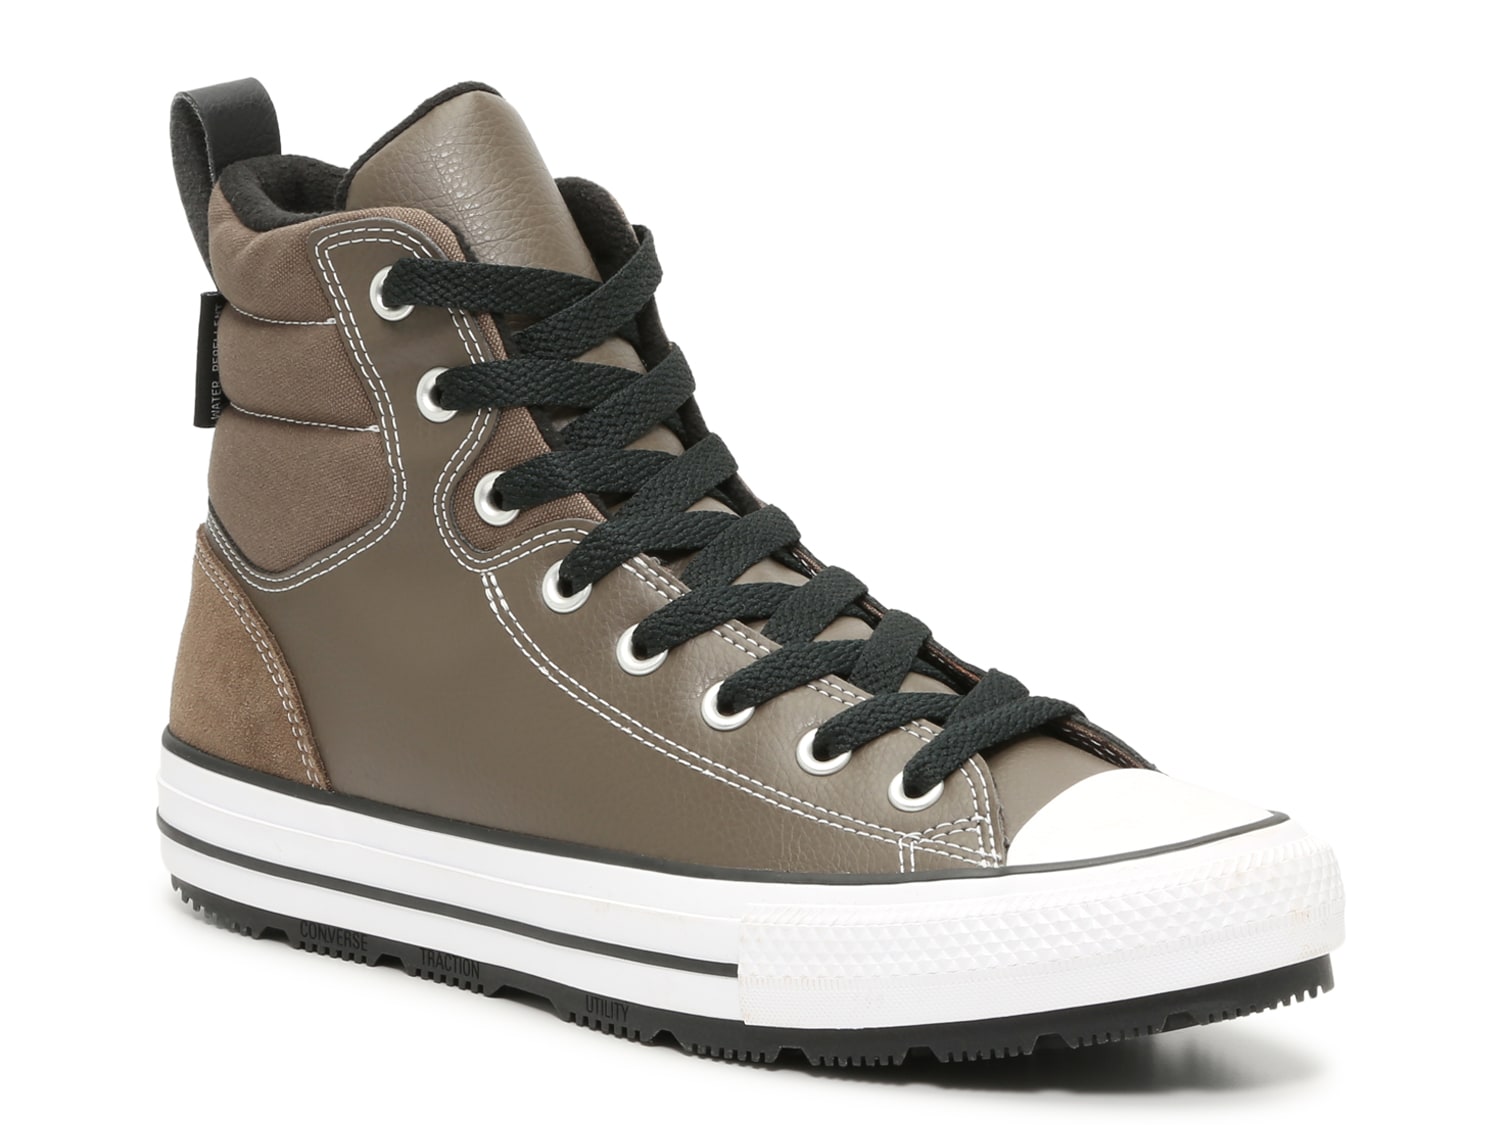 Converse Chuck Taylor | DSW - Shipping Free - Boot Men\'s Berkshire All Star